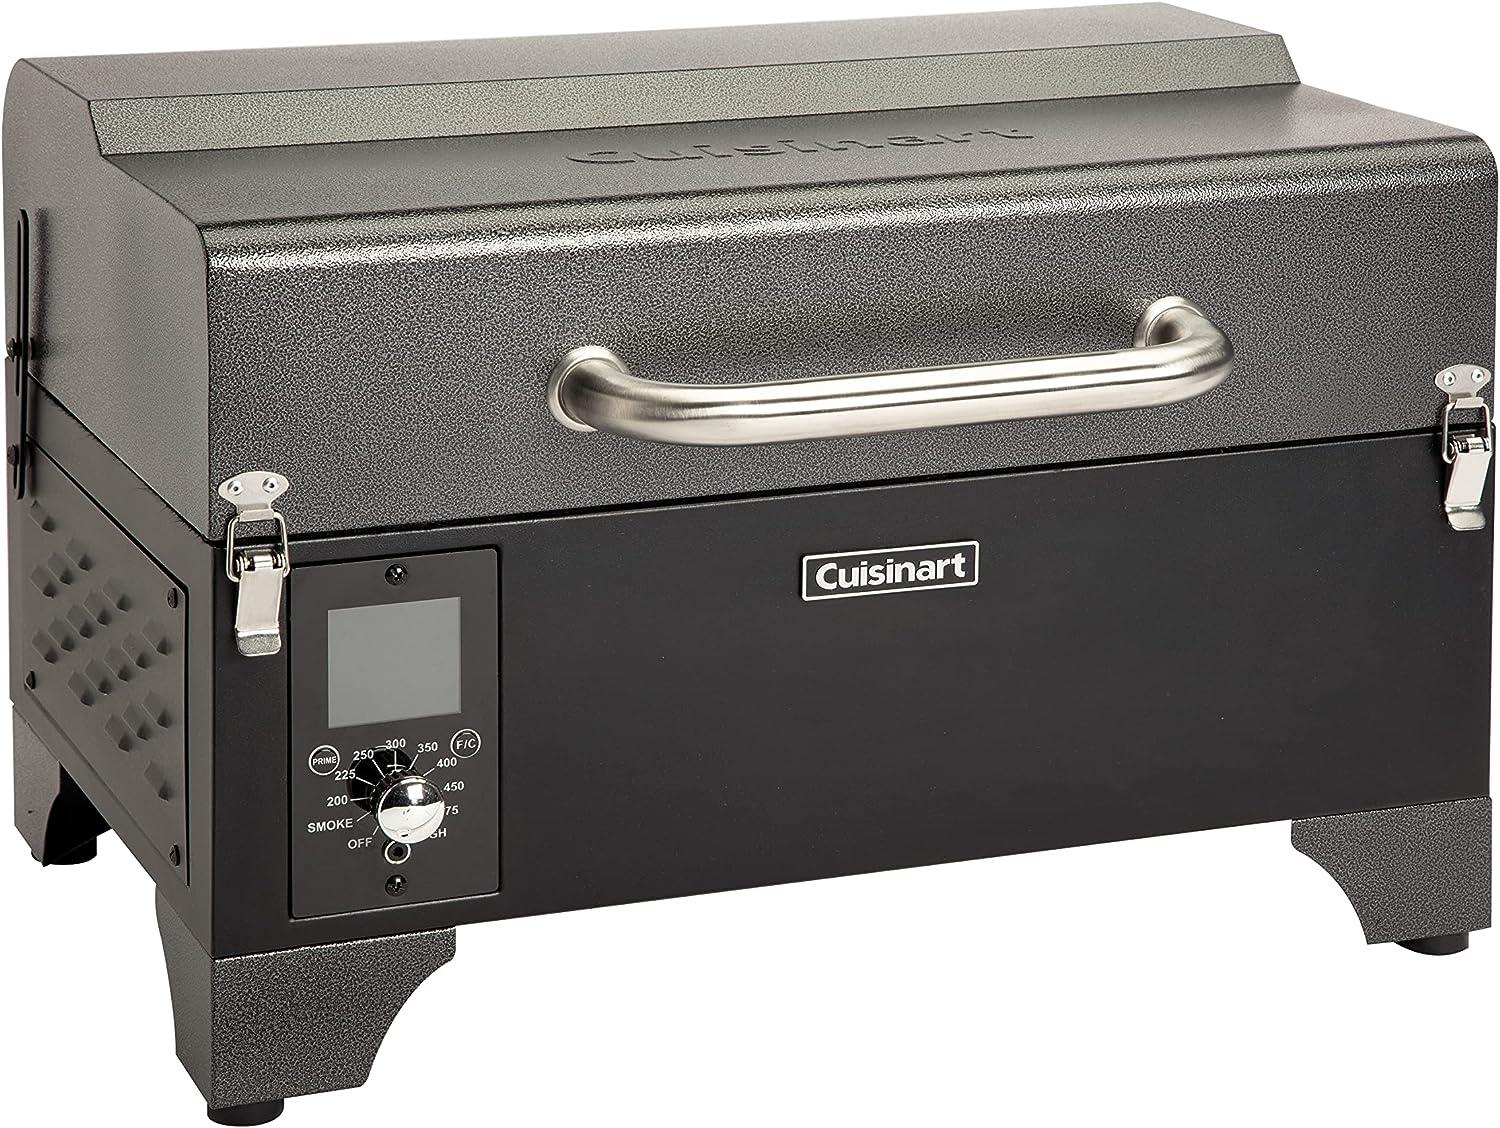 Cuisinart CPG-256 Portable Wood Pellet Grill and Smoker for $215.04 Shipped